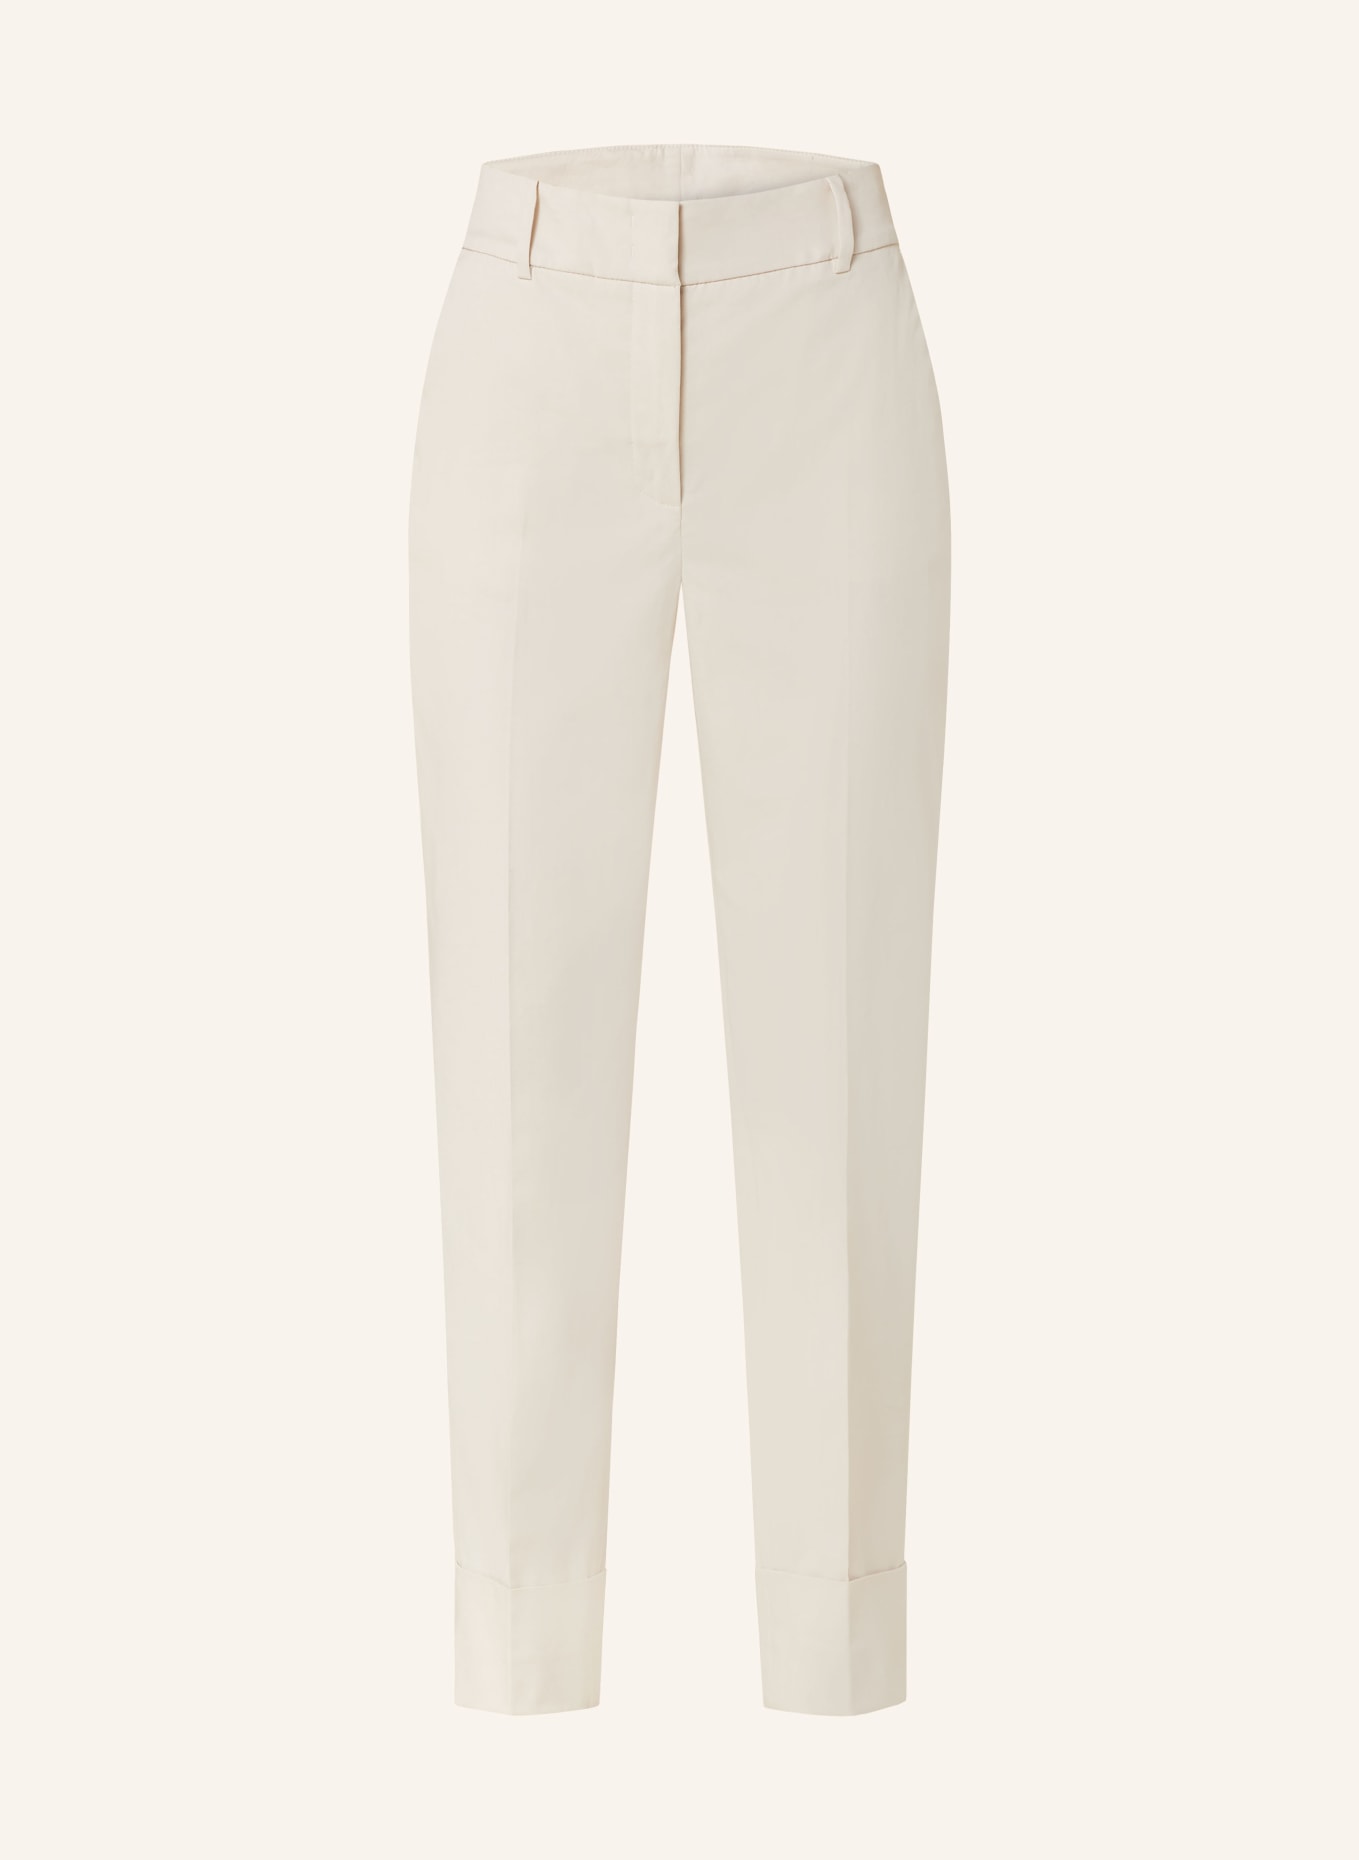 PESERICO EASY Pants, Color: CREAM (Image 1)